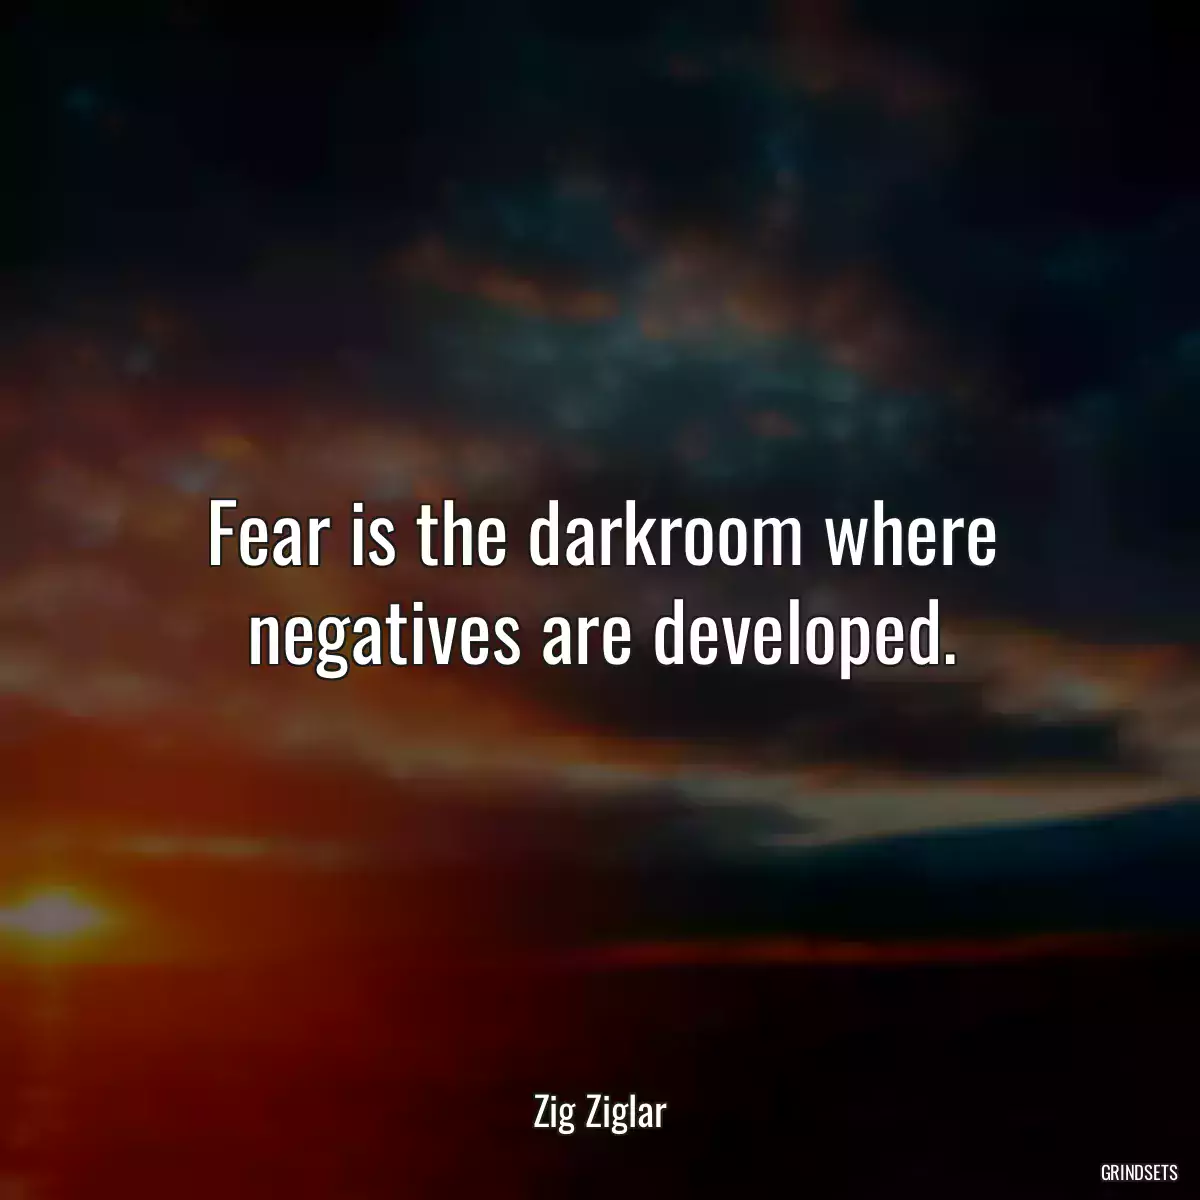 Fear is the darkroom where negatives are developed.